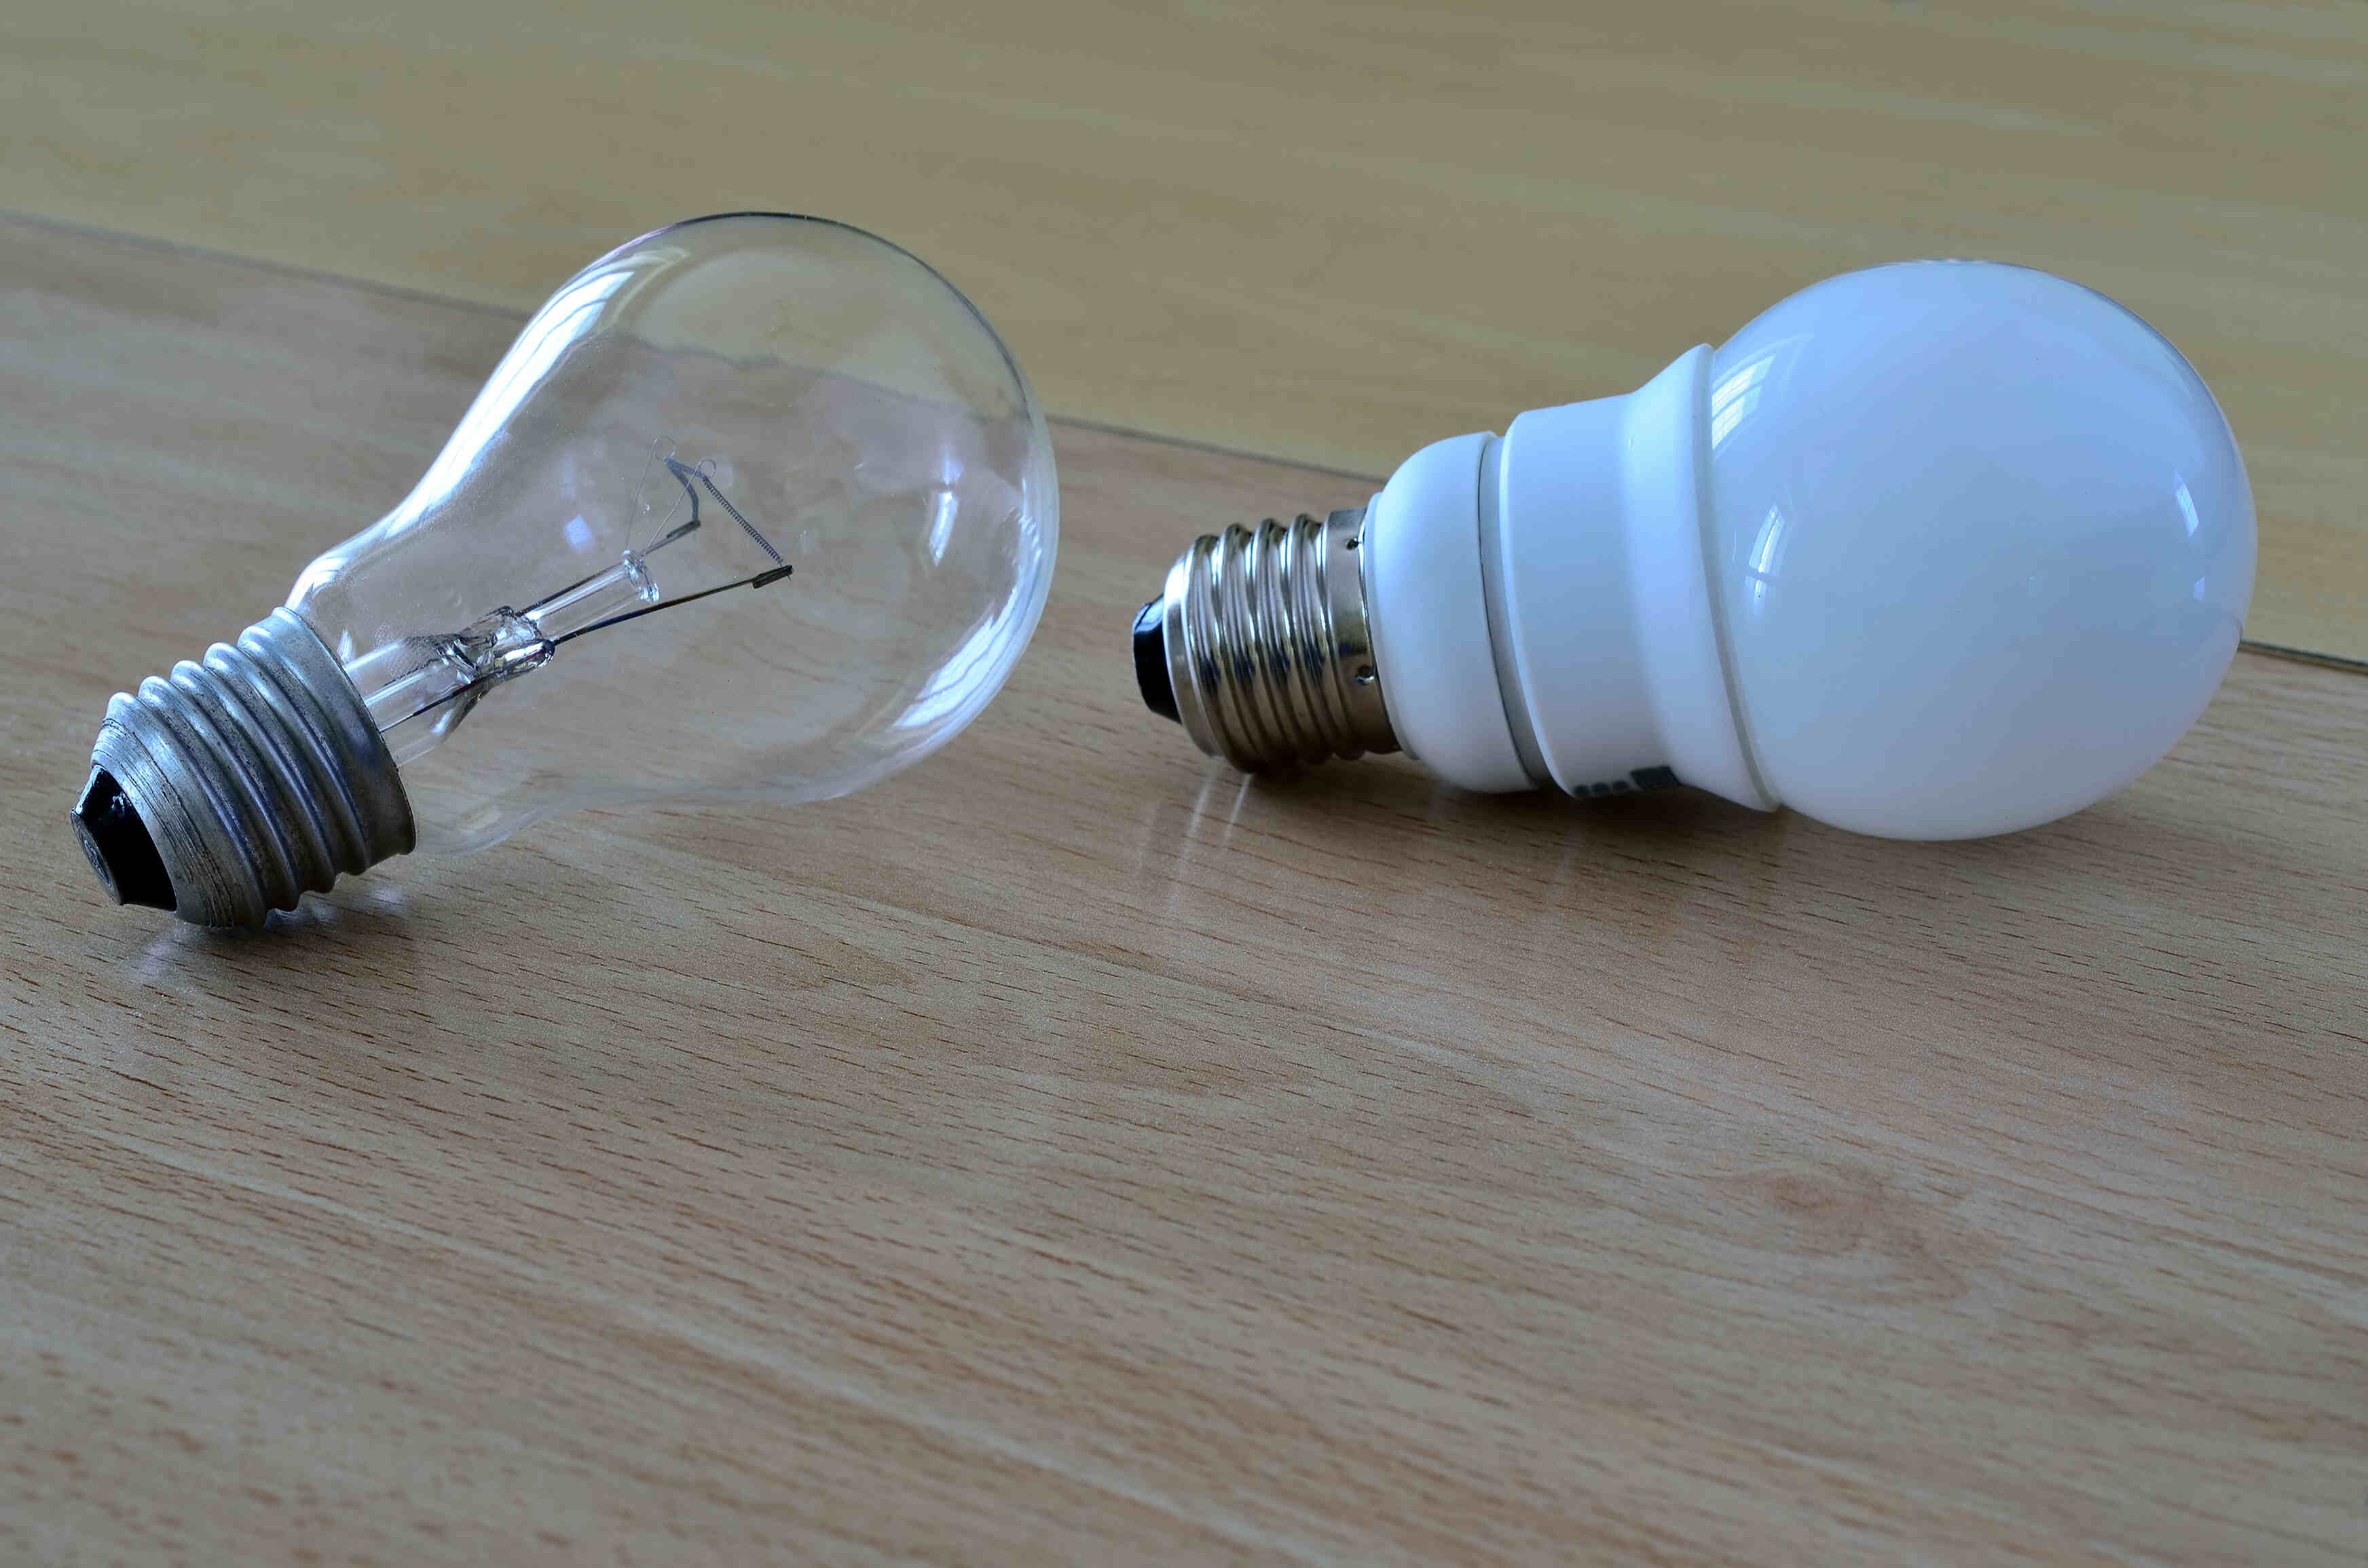 Why Is A Compact Fluorescent Light Bulb More Efficient Than An Incandescent Bulb?